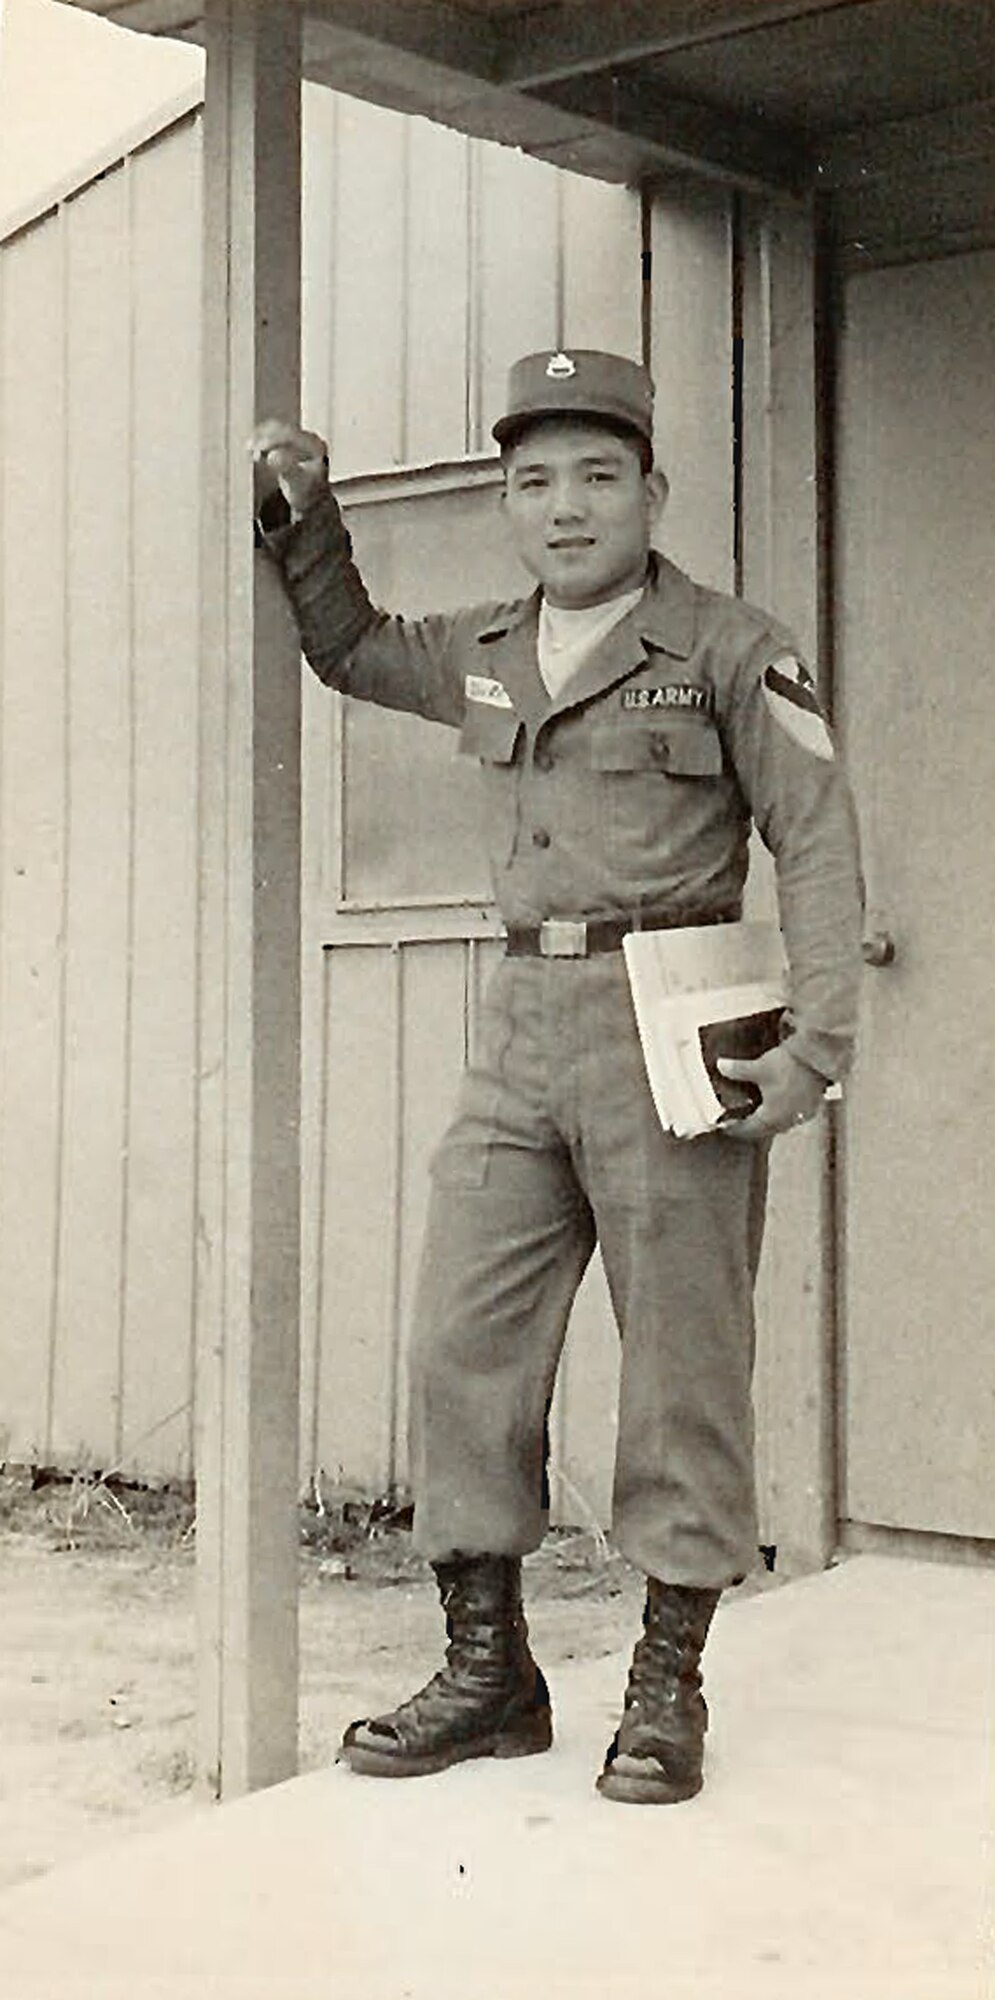 Tatsuo “Jimmy” Schwartz stands in uniform. After serving the U.S. military for more than 50 years, Schwartz has developed relationships with leaders from around the Department of Defense.